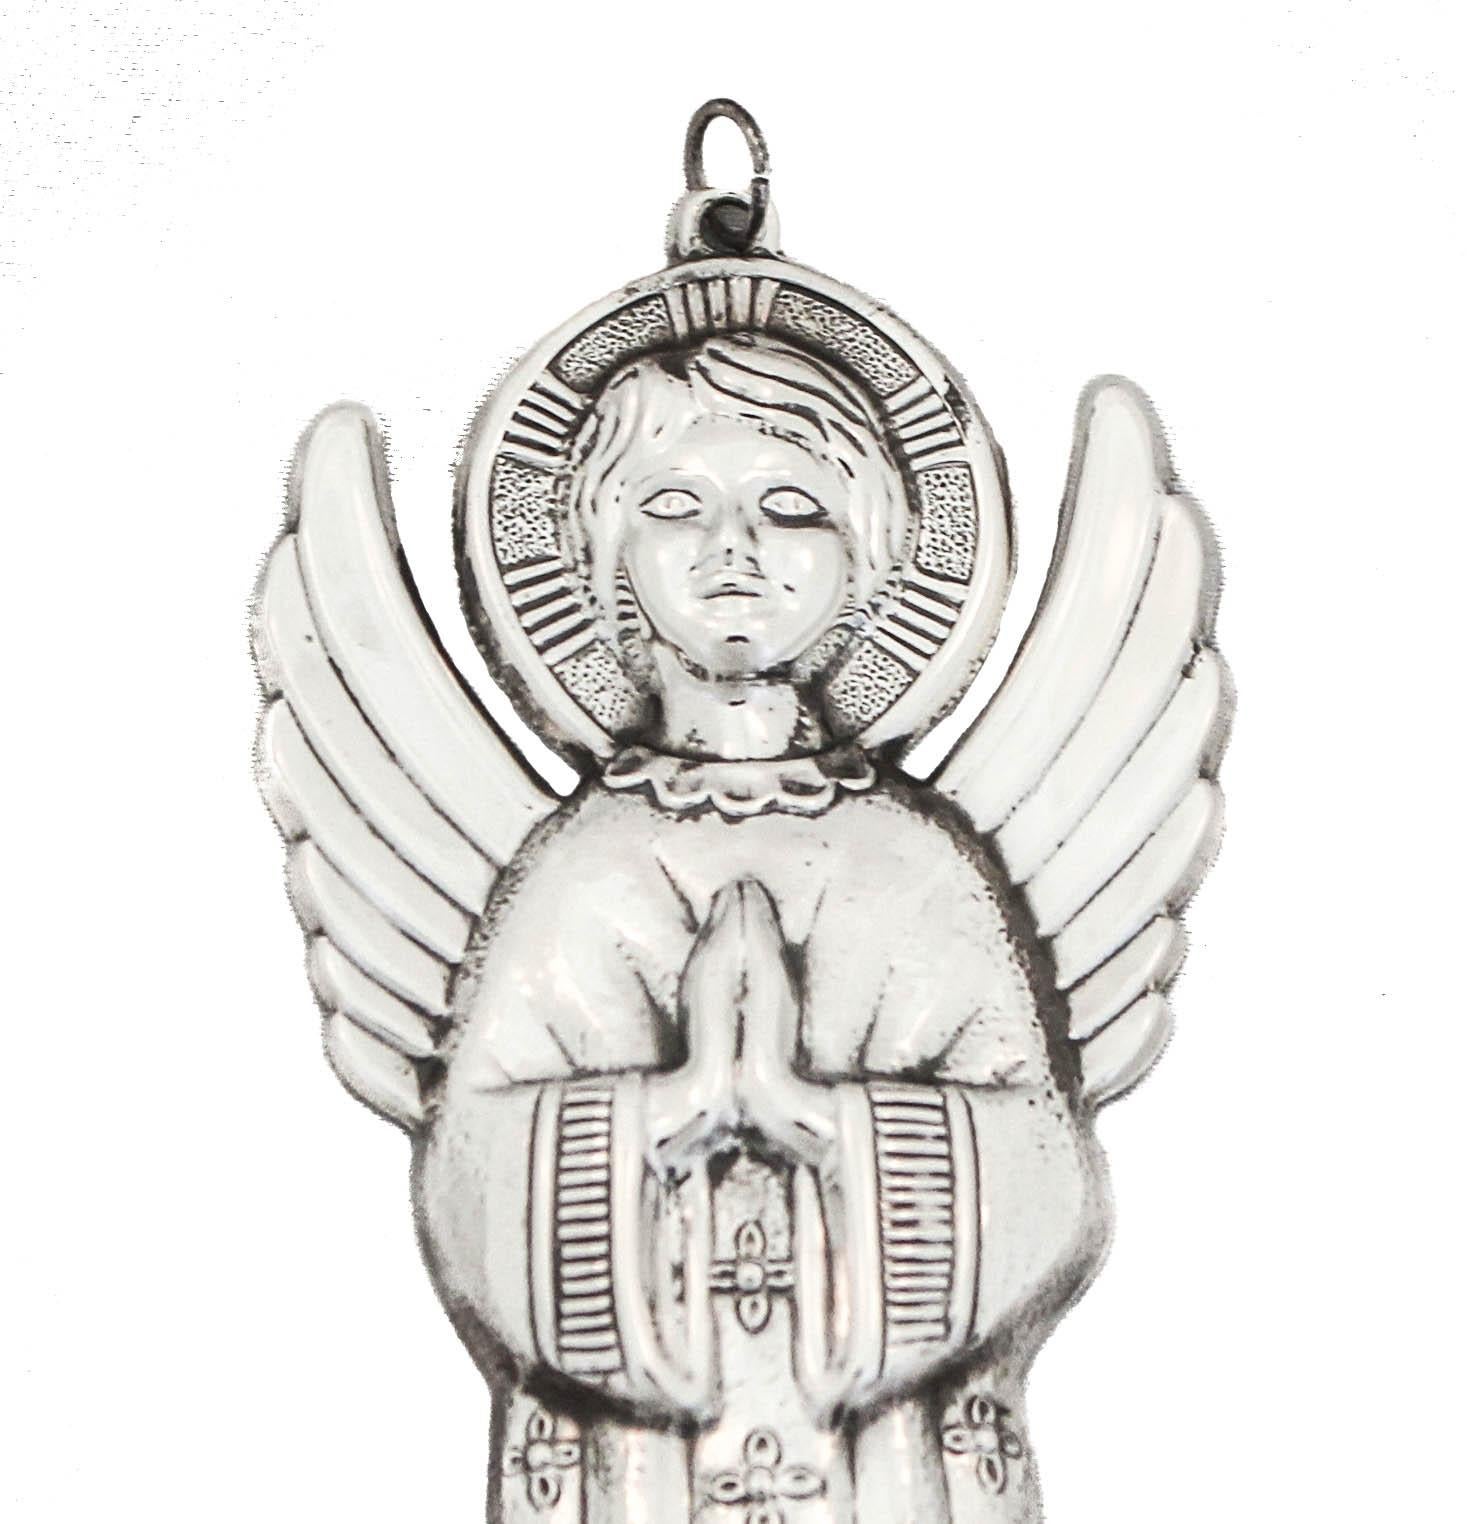 Being offered is a sterling silver Christmas ornament made by Gorham Silversmiths of Providence, Rhode Island, circa 1983.  It is of an angel praying with its hands together.  It has wings and a halo around its head and a cross pattern on its robe. 